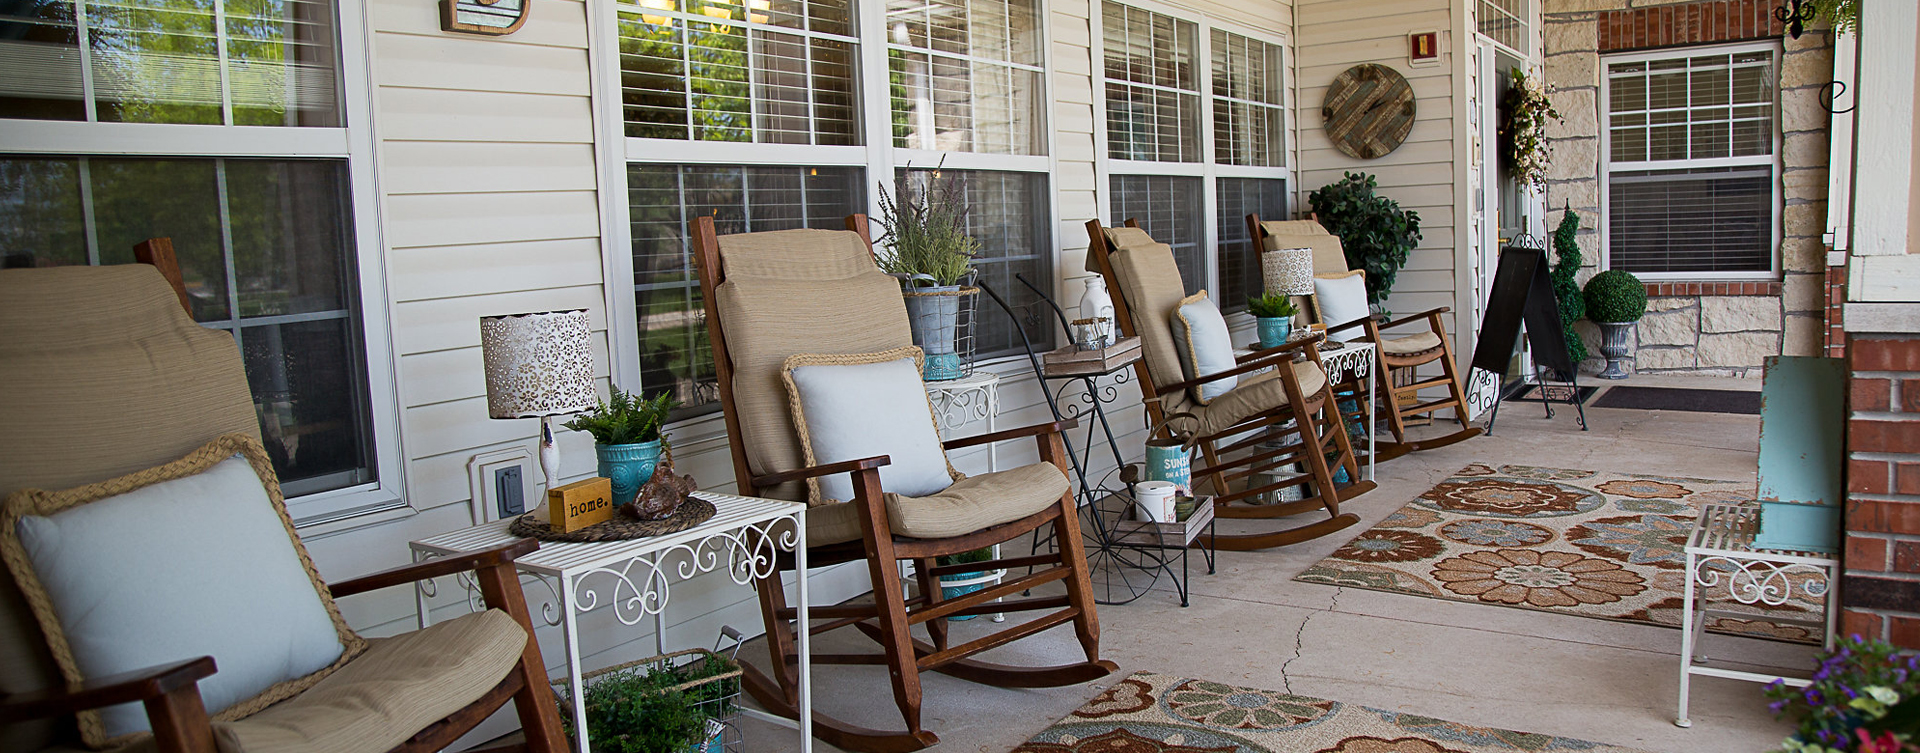 Enjoy conversations with friends on the porch at Bickford of Burlington